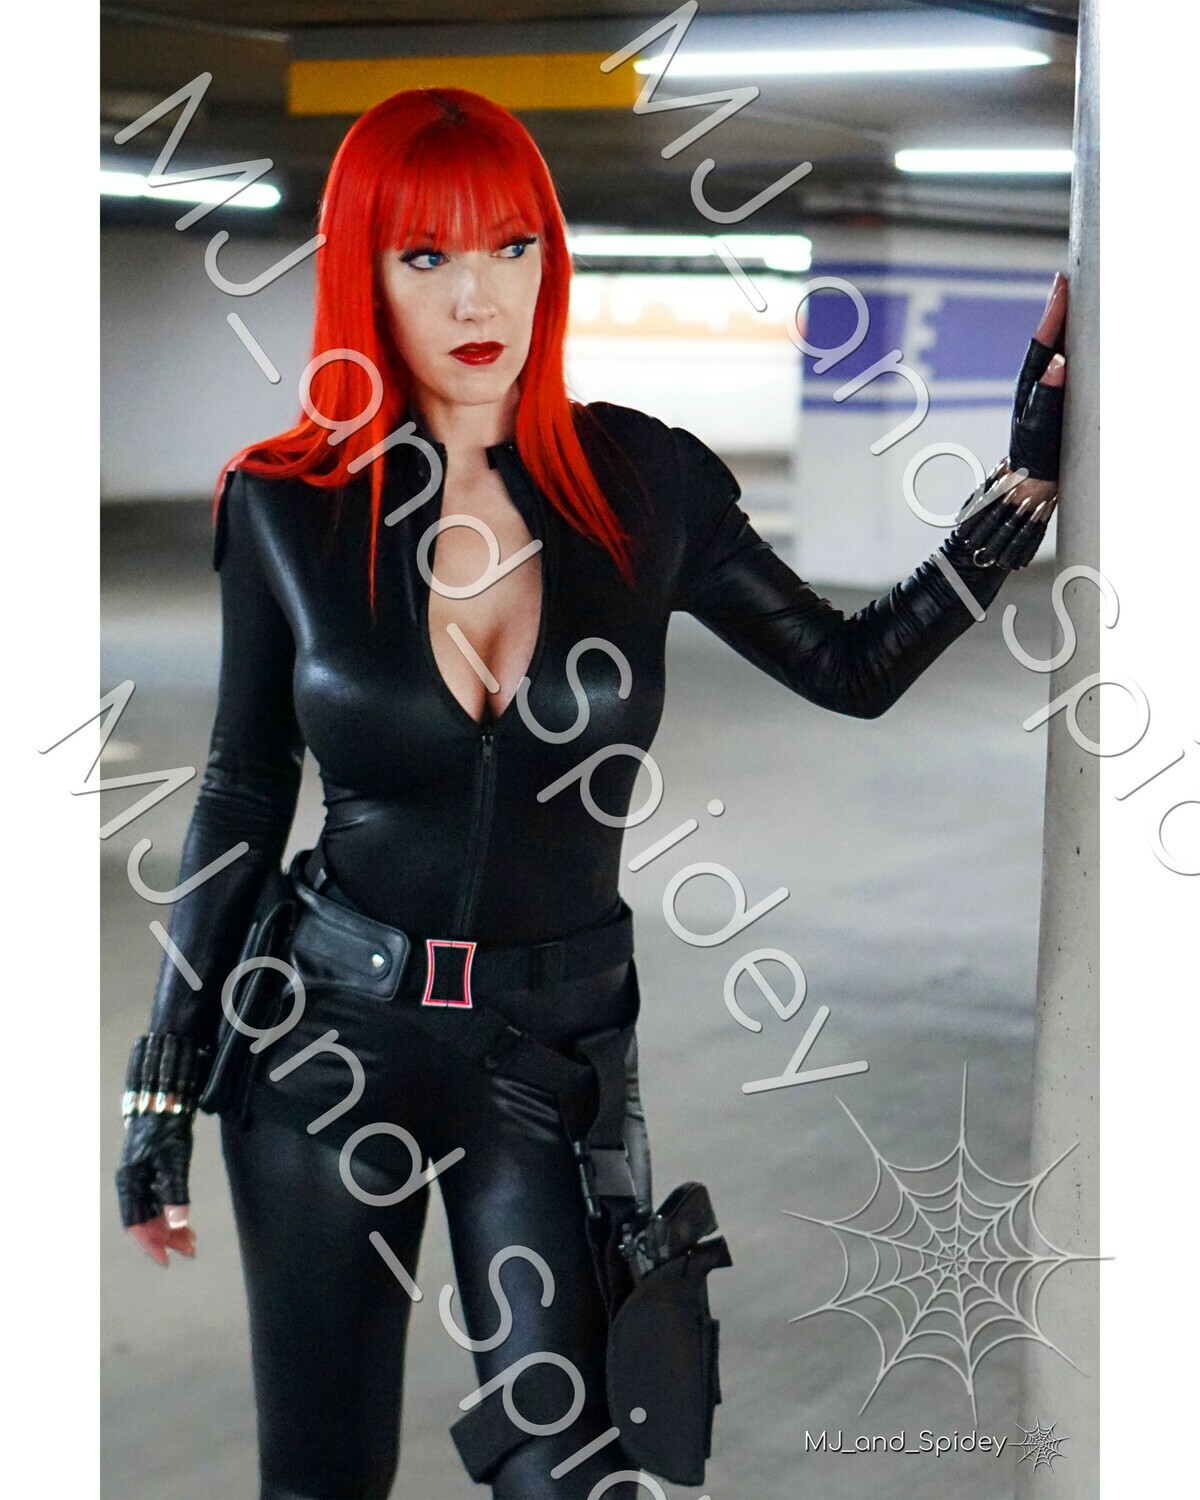 Marvel - Avengers - Black Widow 7 - Digital Cosplay Image (@MJ_and_Spidey, MJ and Spidey, Comics)